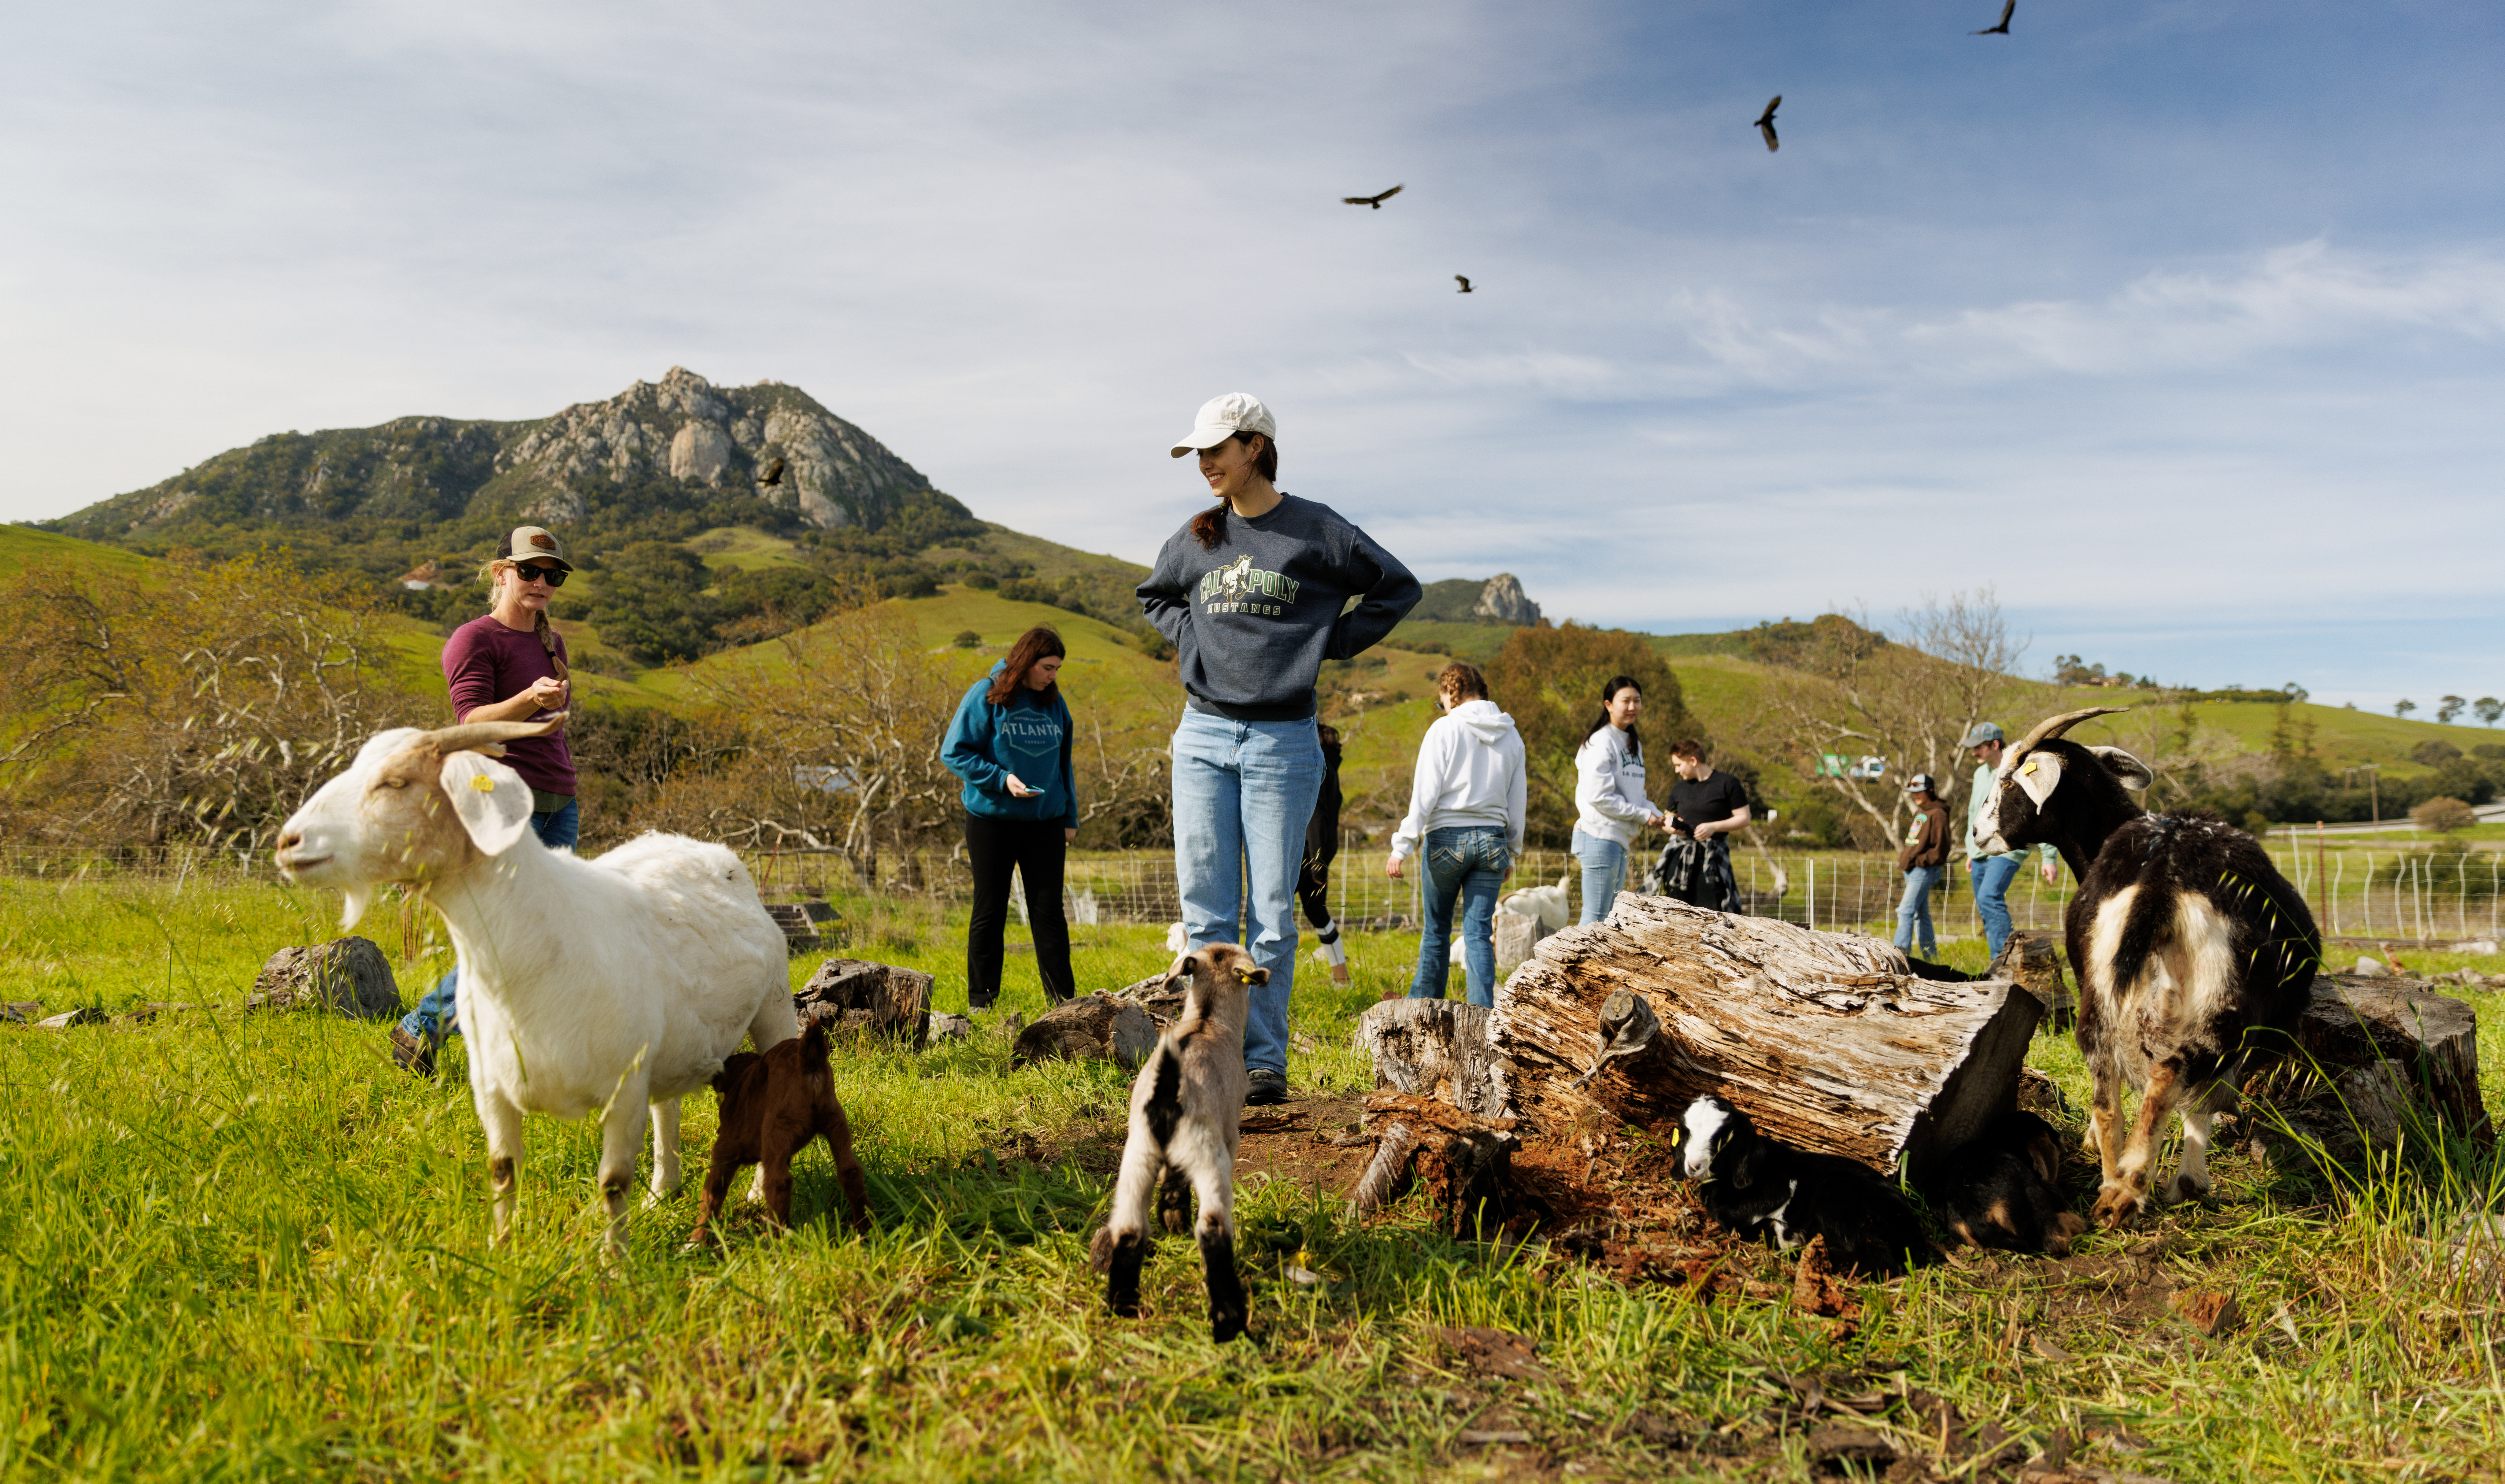 Students and goats, including newborn kids, gather in a grassy field with Bishop Peak in the background.